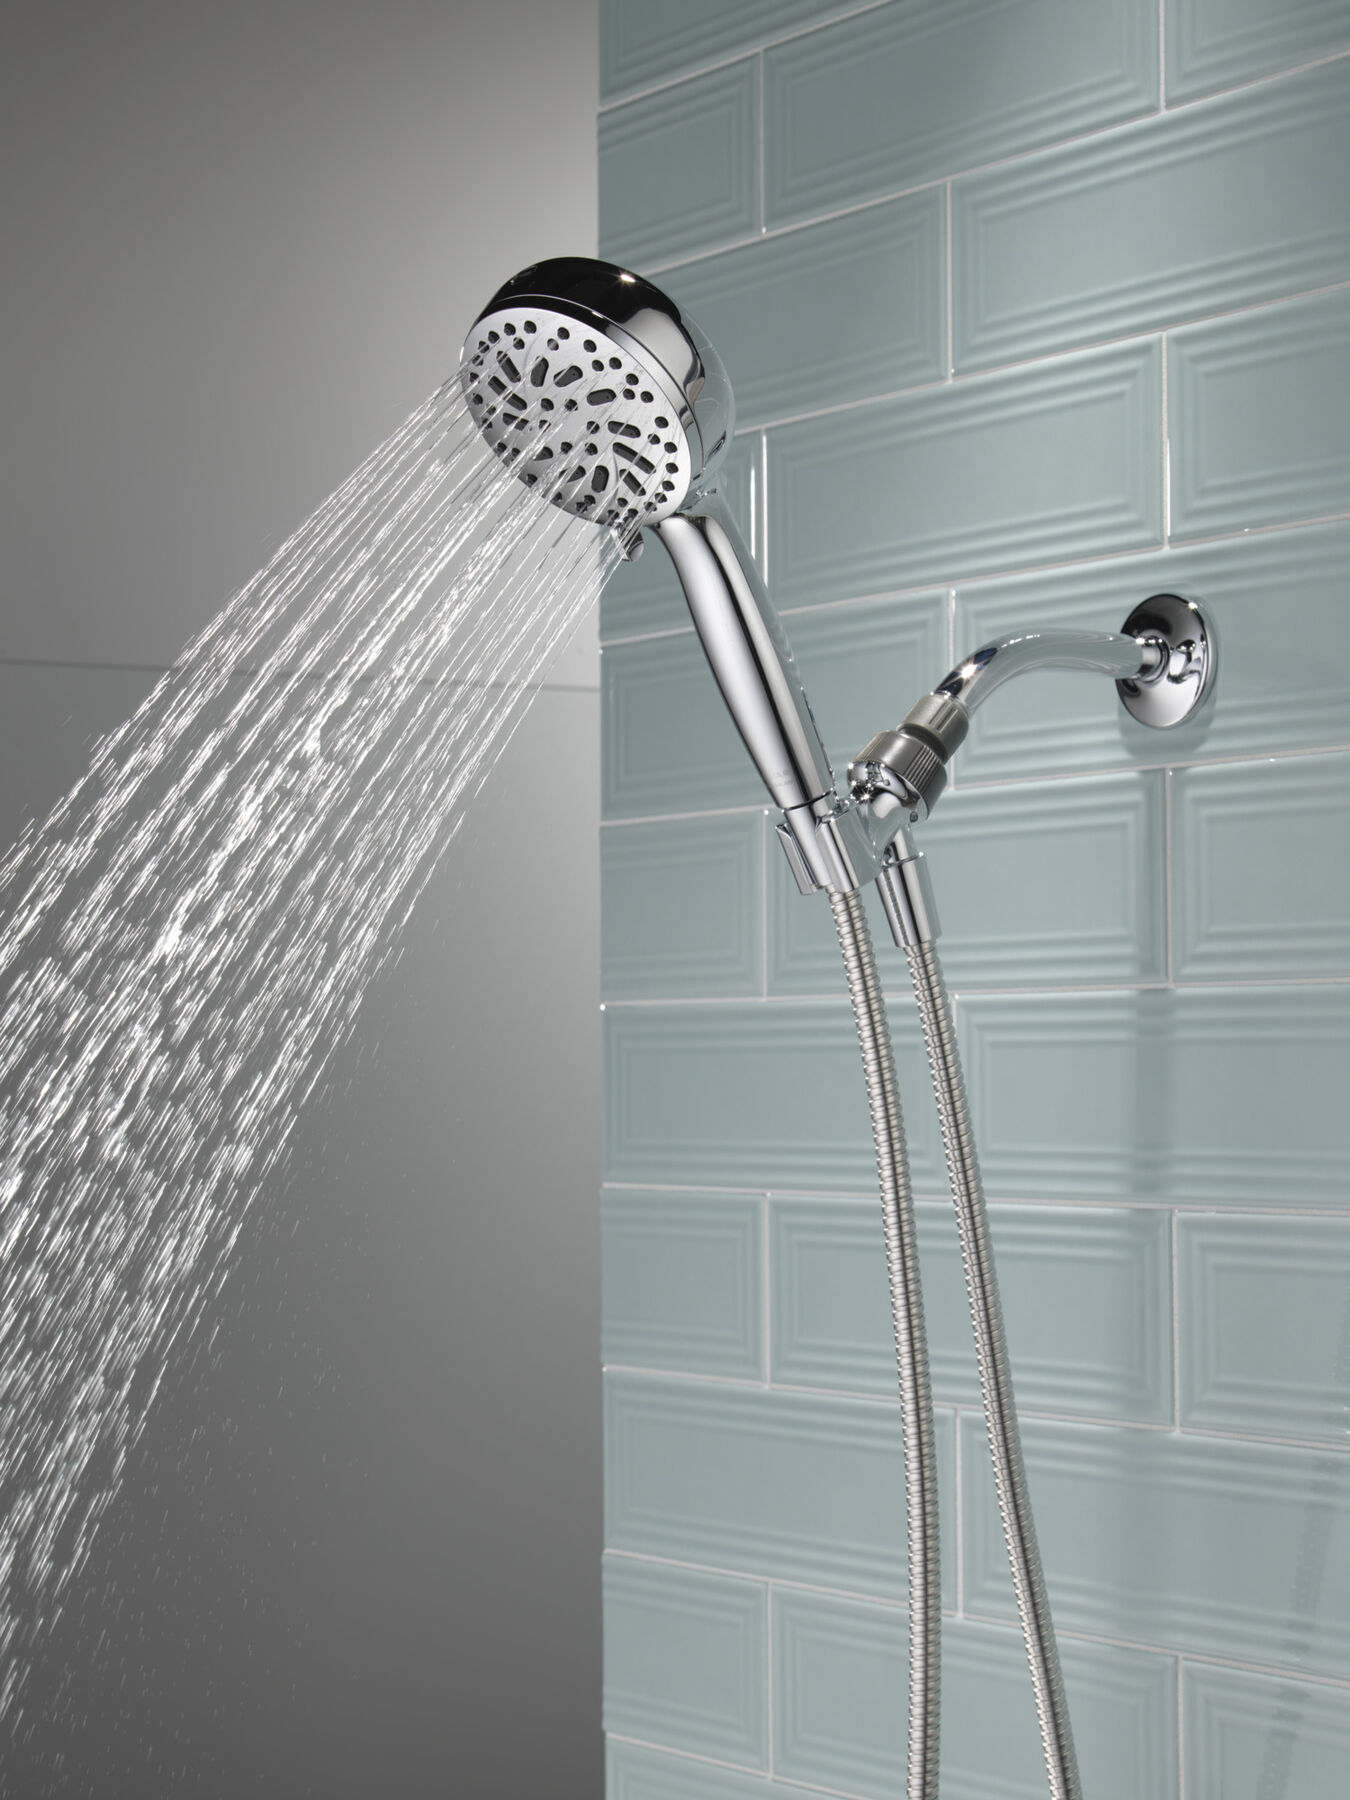 Collections Etc Handheld Shower Head Holder with Wall-Mount and Extra-Long  Hose - Offers 5 Water Pressure Settings for Spa-Quality Shower, Silver